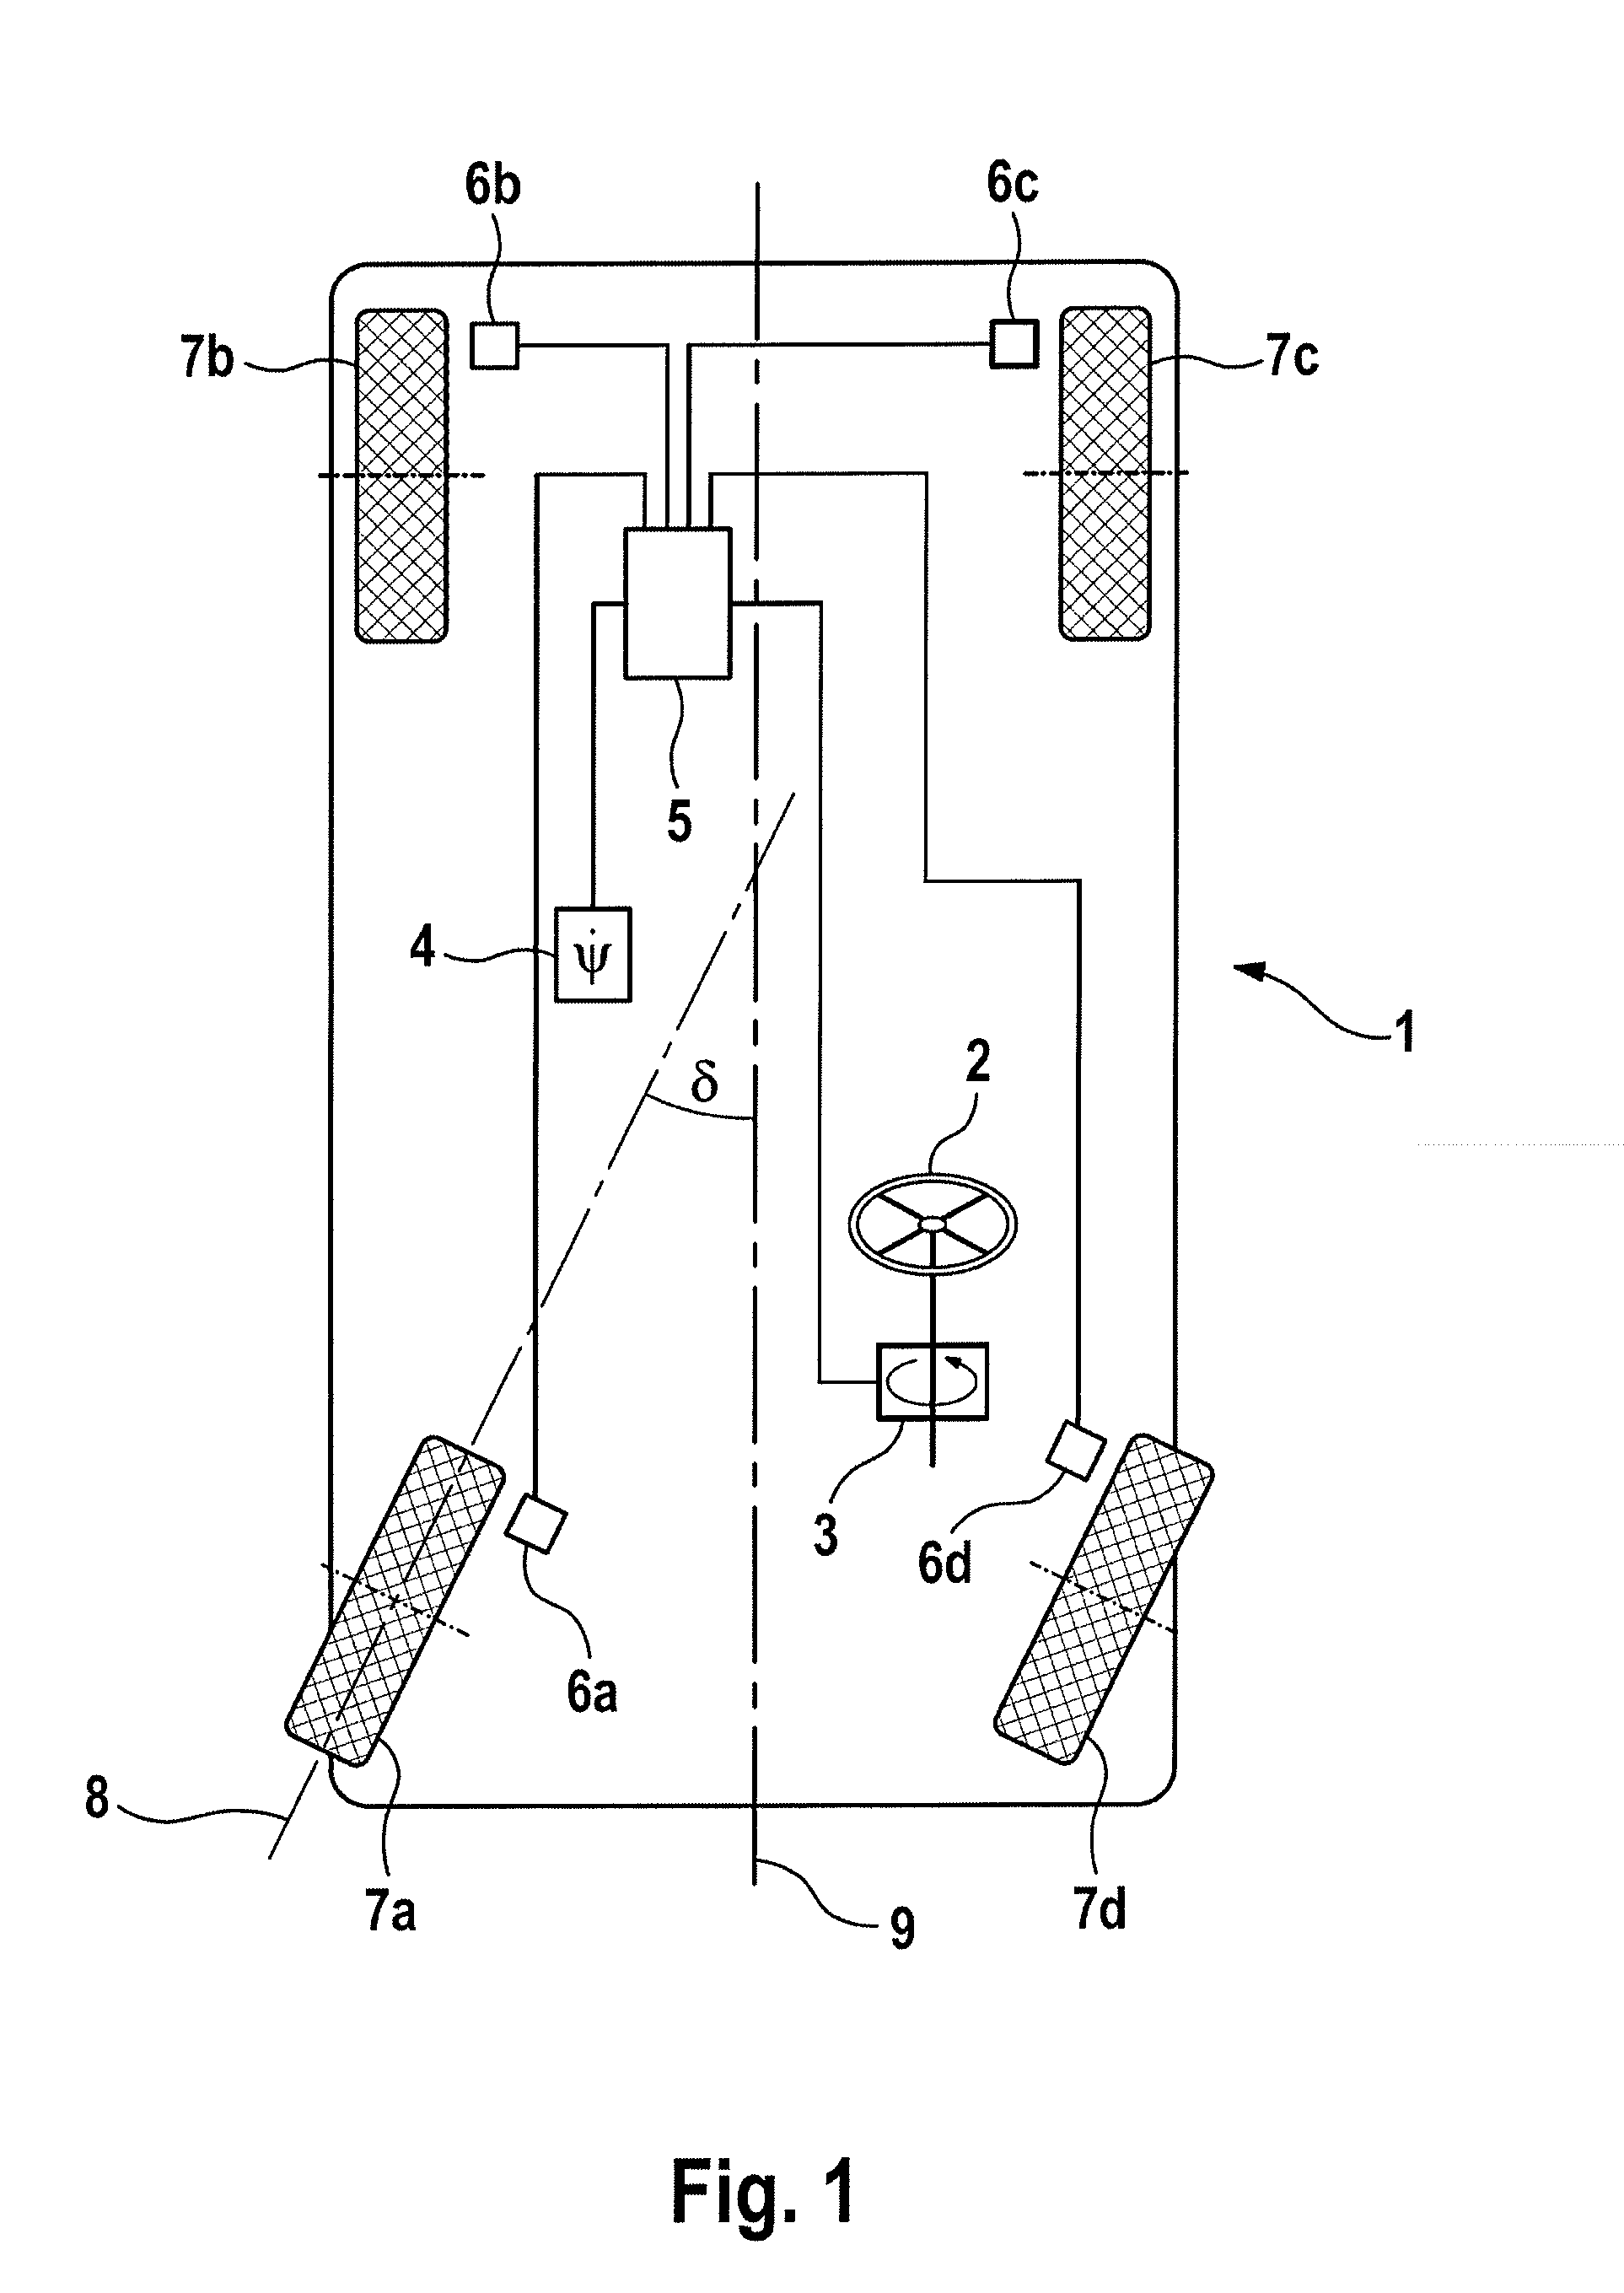 Determination of steering angle for a motor vehicle